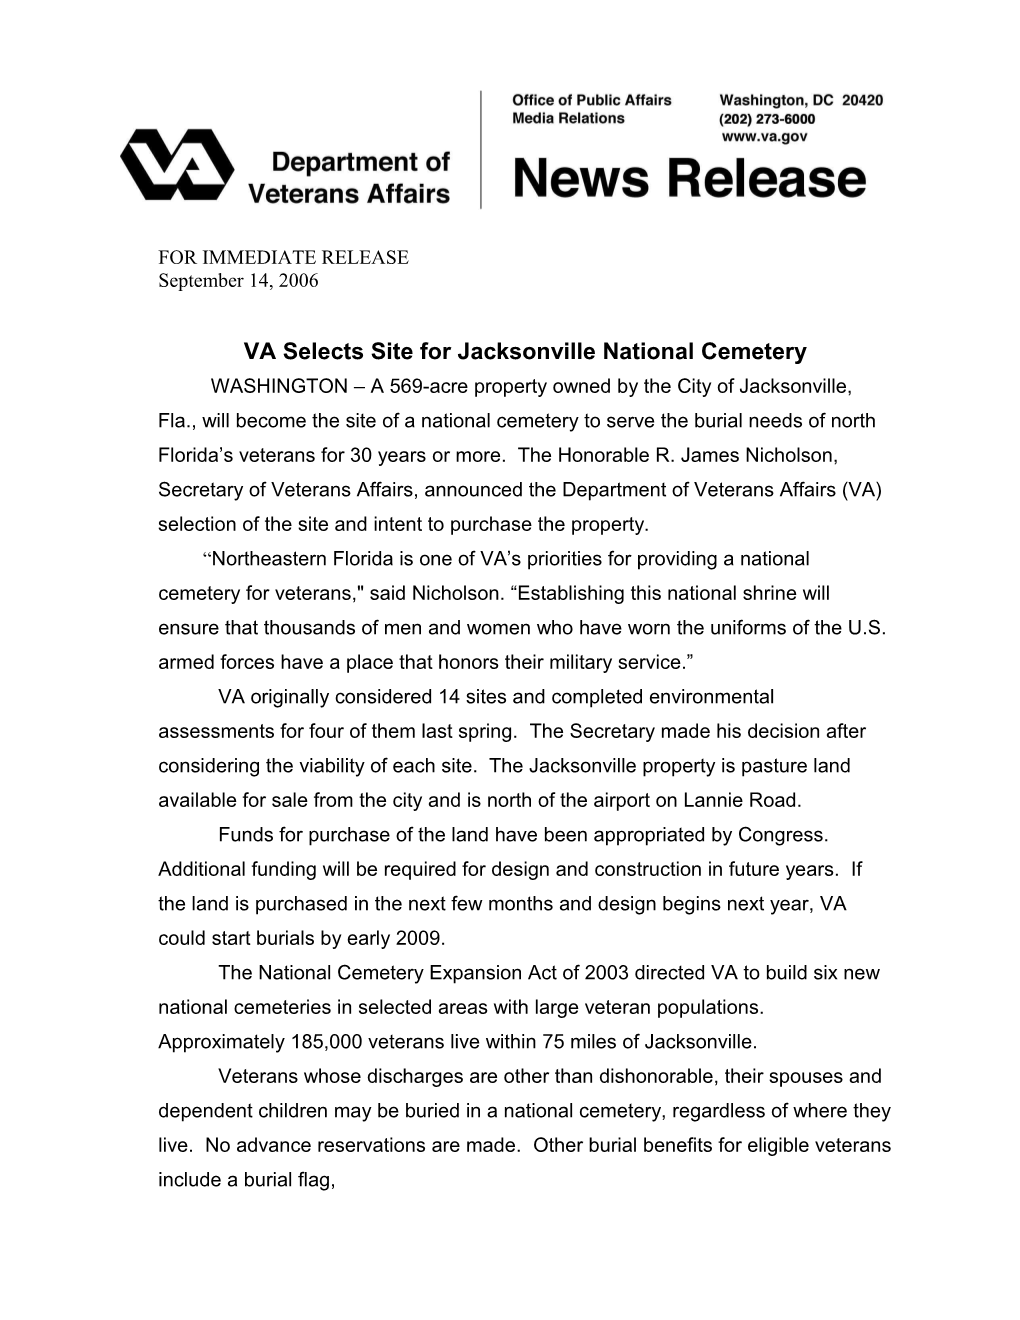 VA Selects Site for Jacksonville National Cemetery